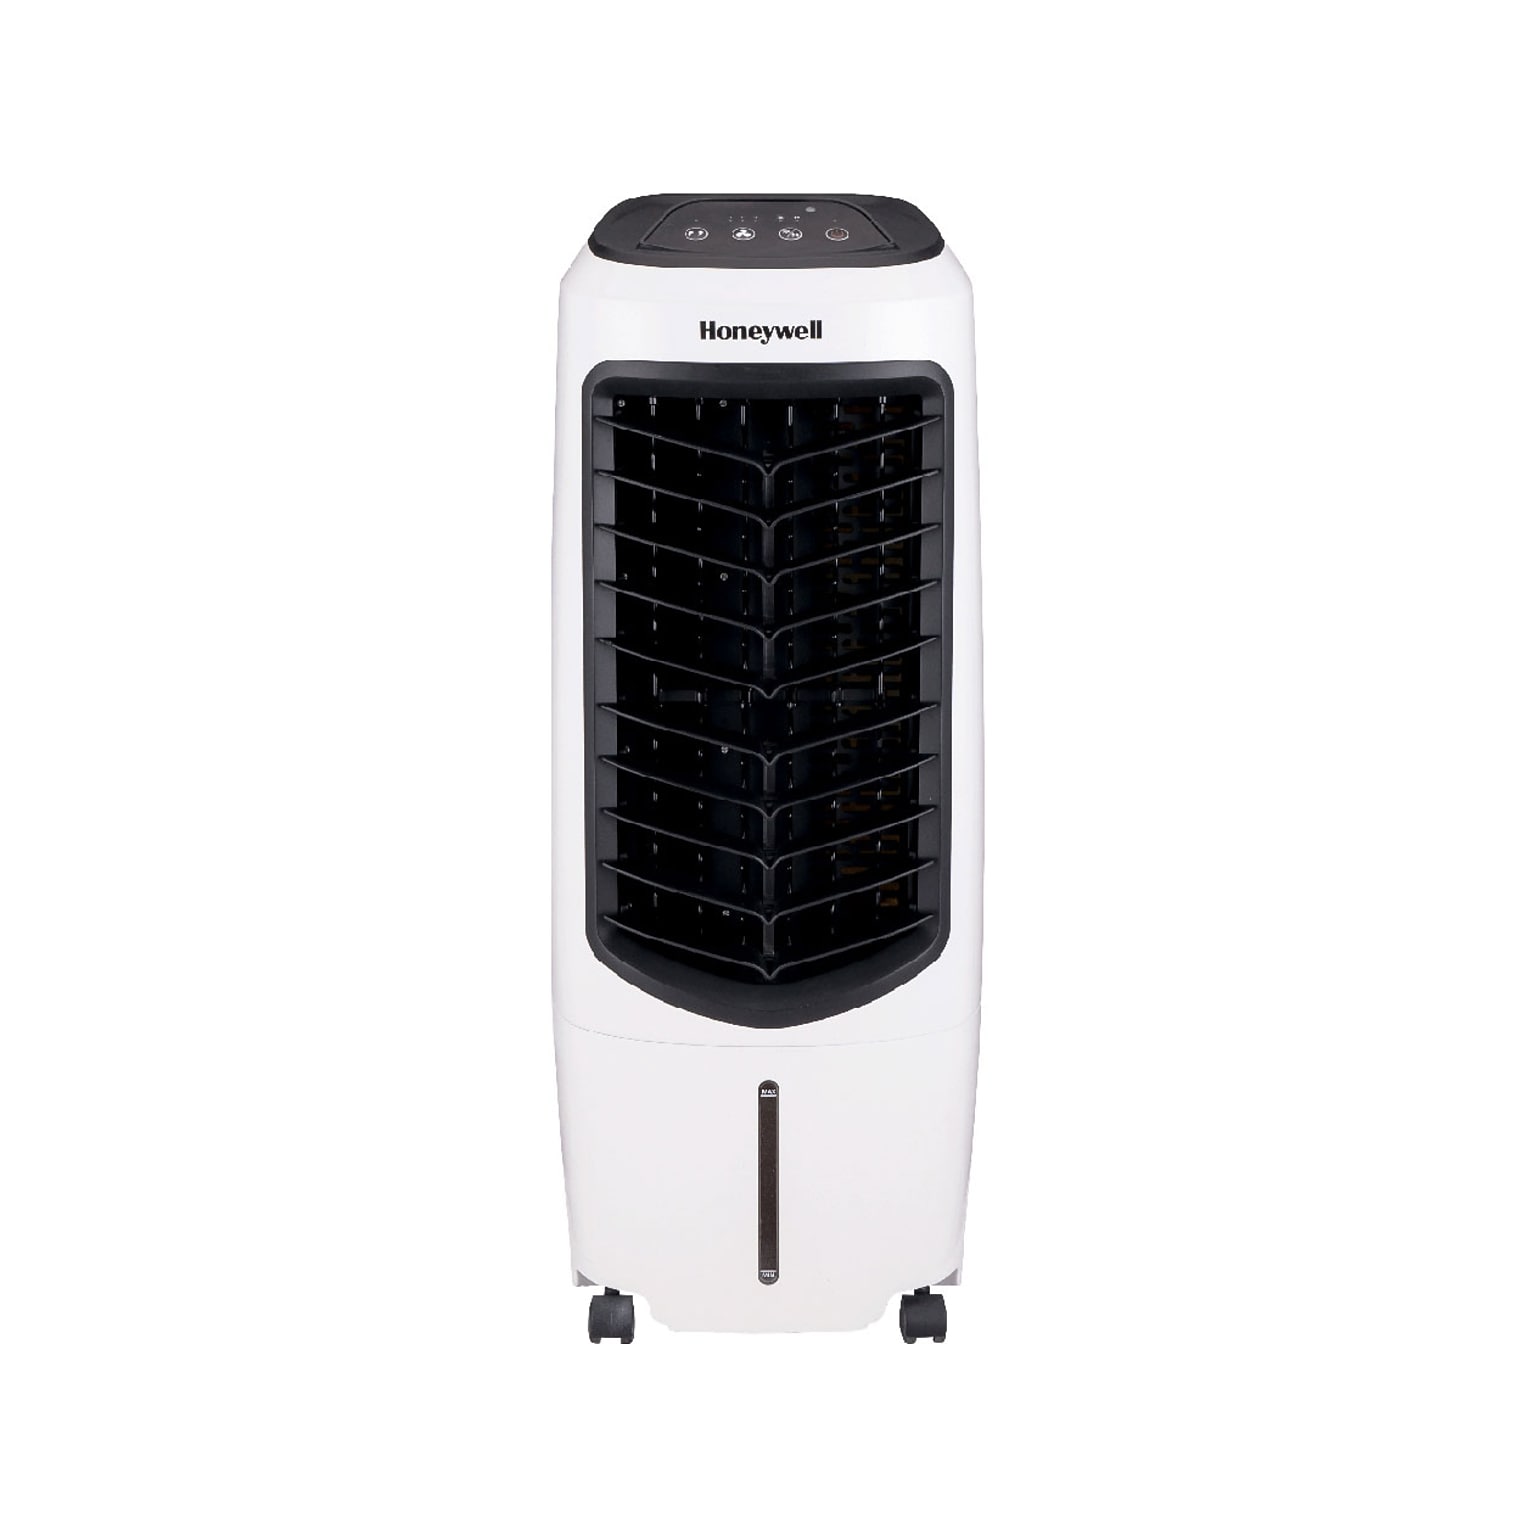 Honeywell Portable Evaporative Cooler with Remote, White (TC10PEU)